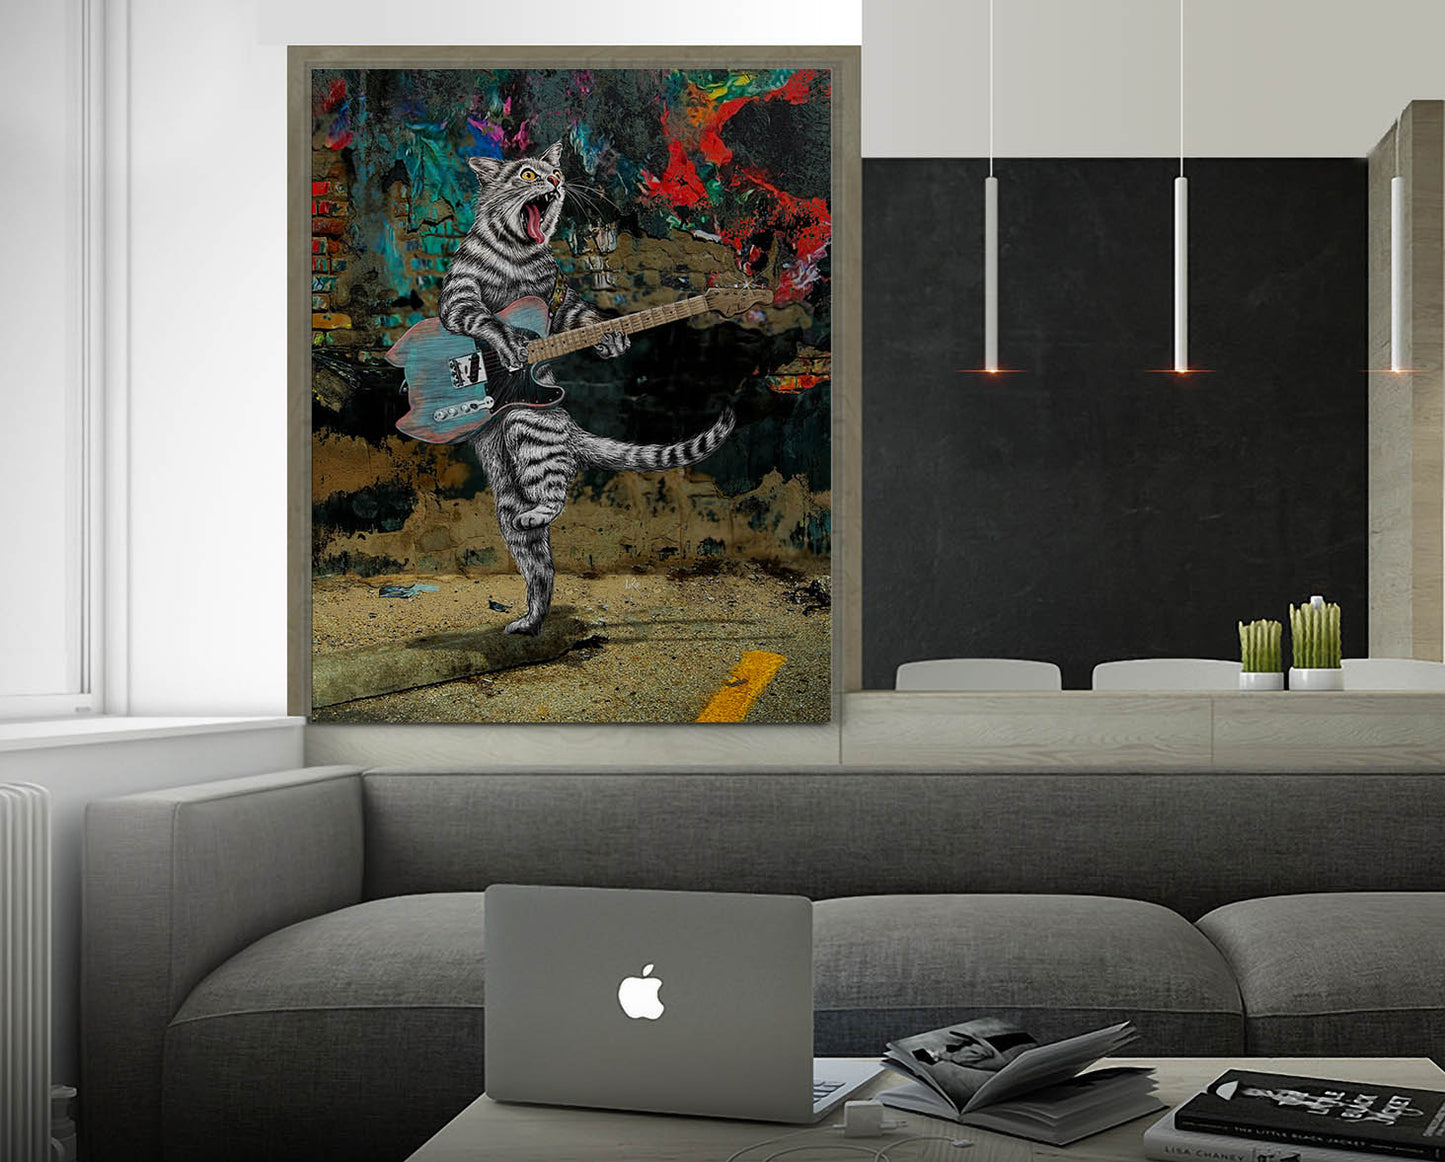 Buskers the Electric Guitar Cat mixed media art by Doug LaRue on a white livingroom wall